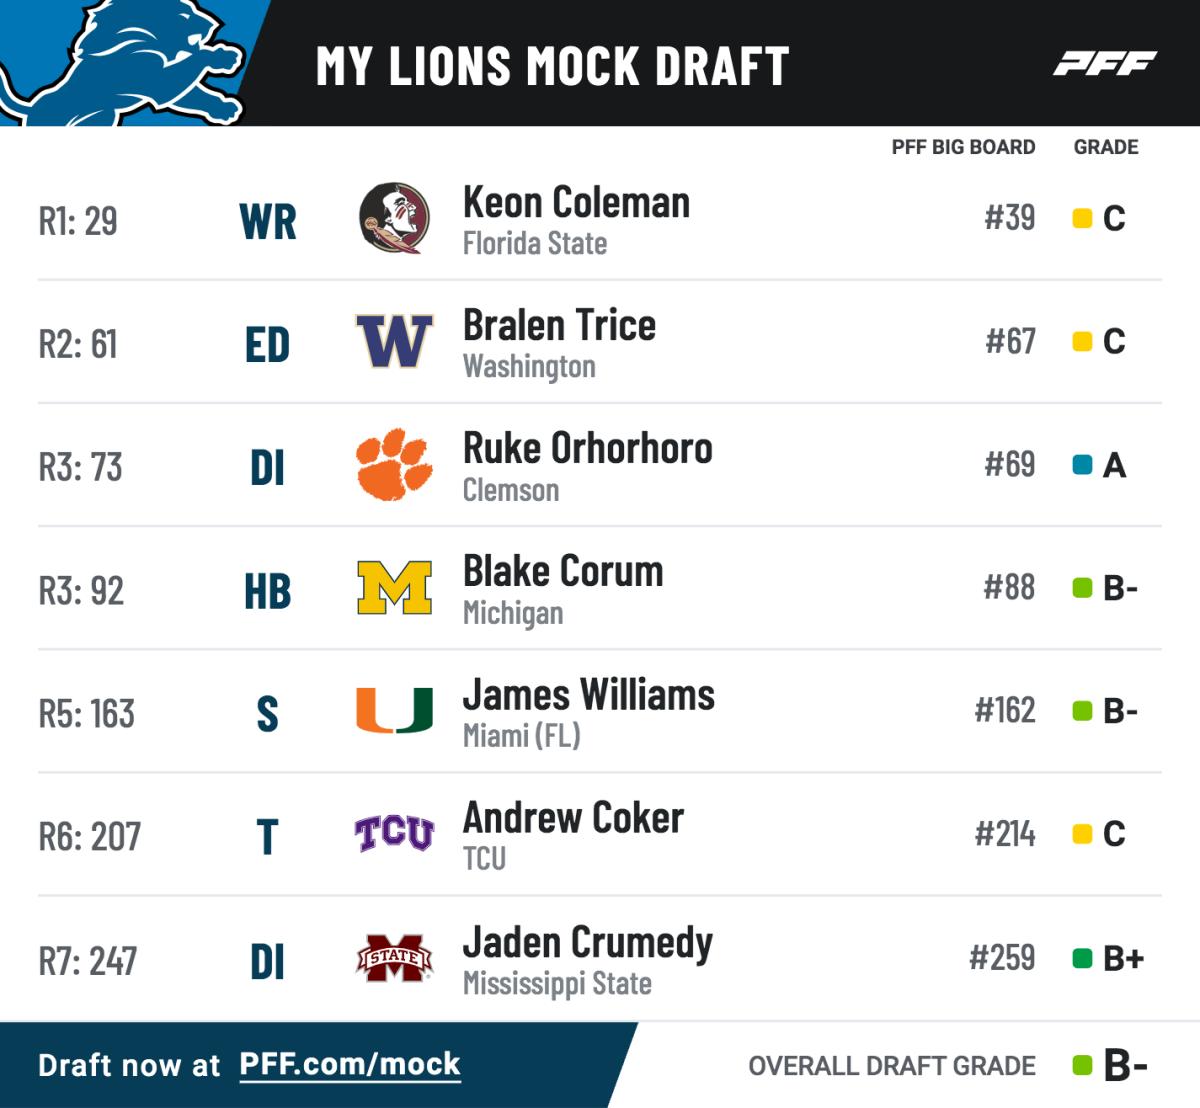 Results from a Pro Football Focus NFL mock draft simulation.